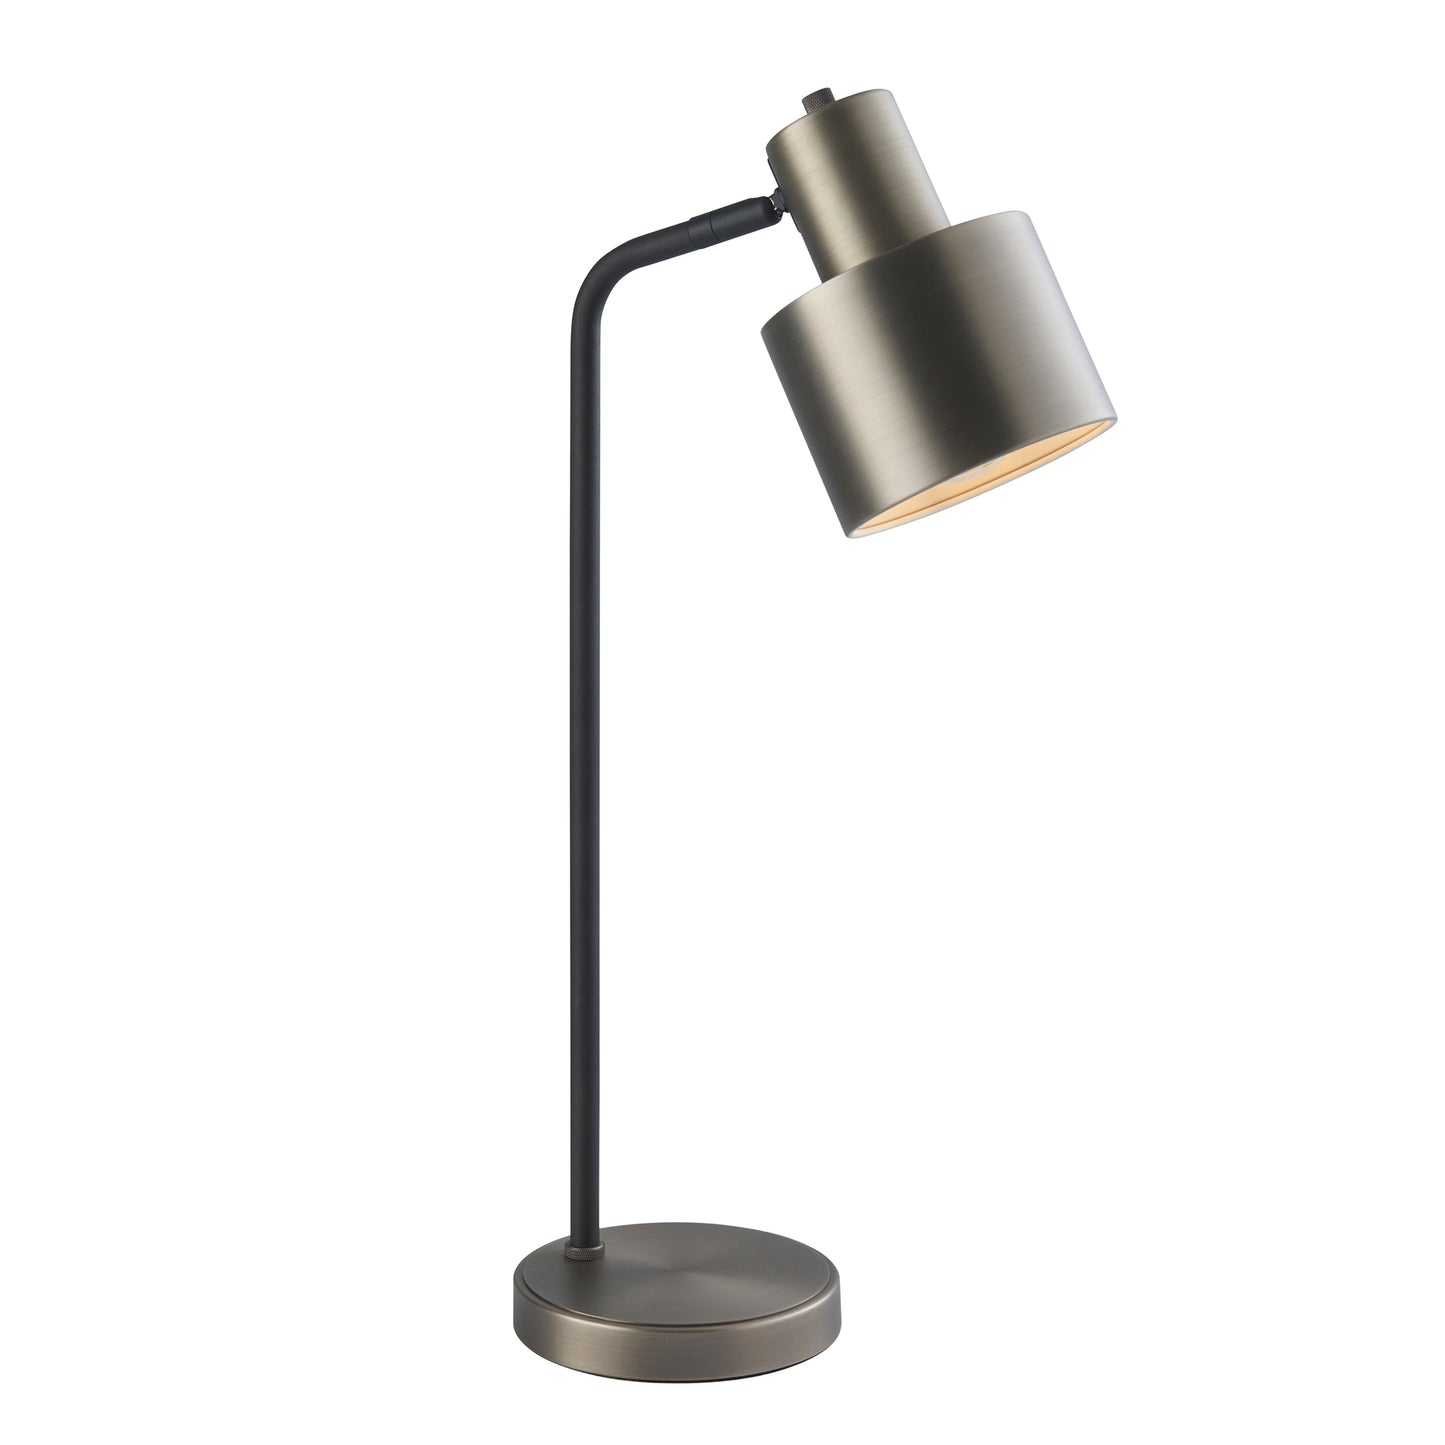 A Mayfield Table Lamp Brass / Black from Kikiathome.co.uk, ideal for home furniture and interior decor, featuring a metal base and a black shade.